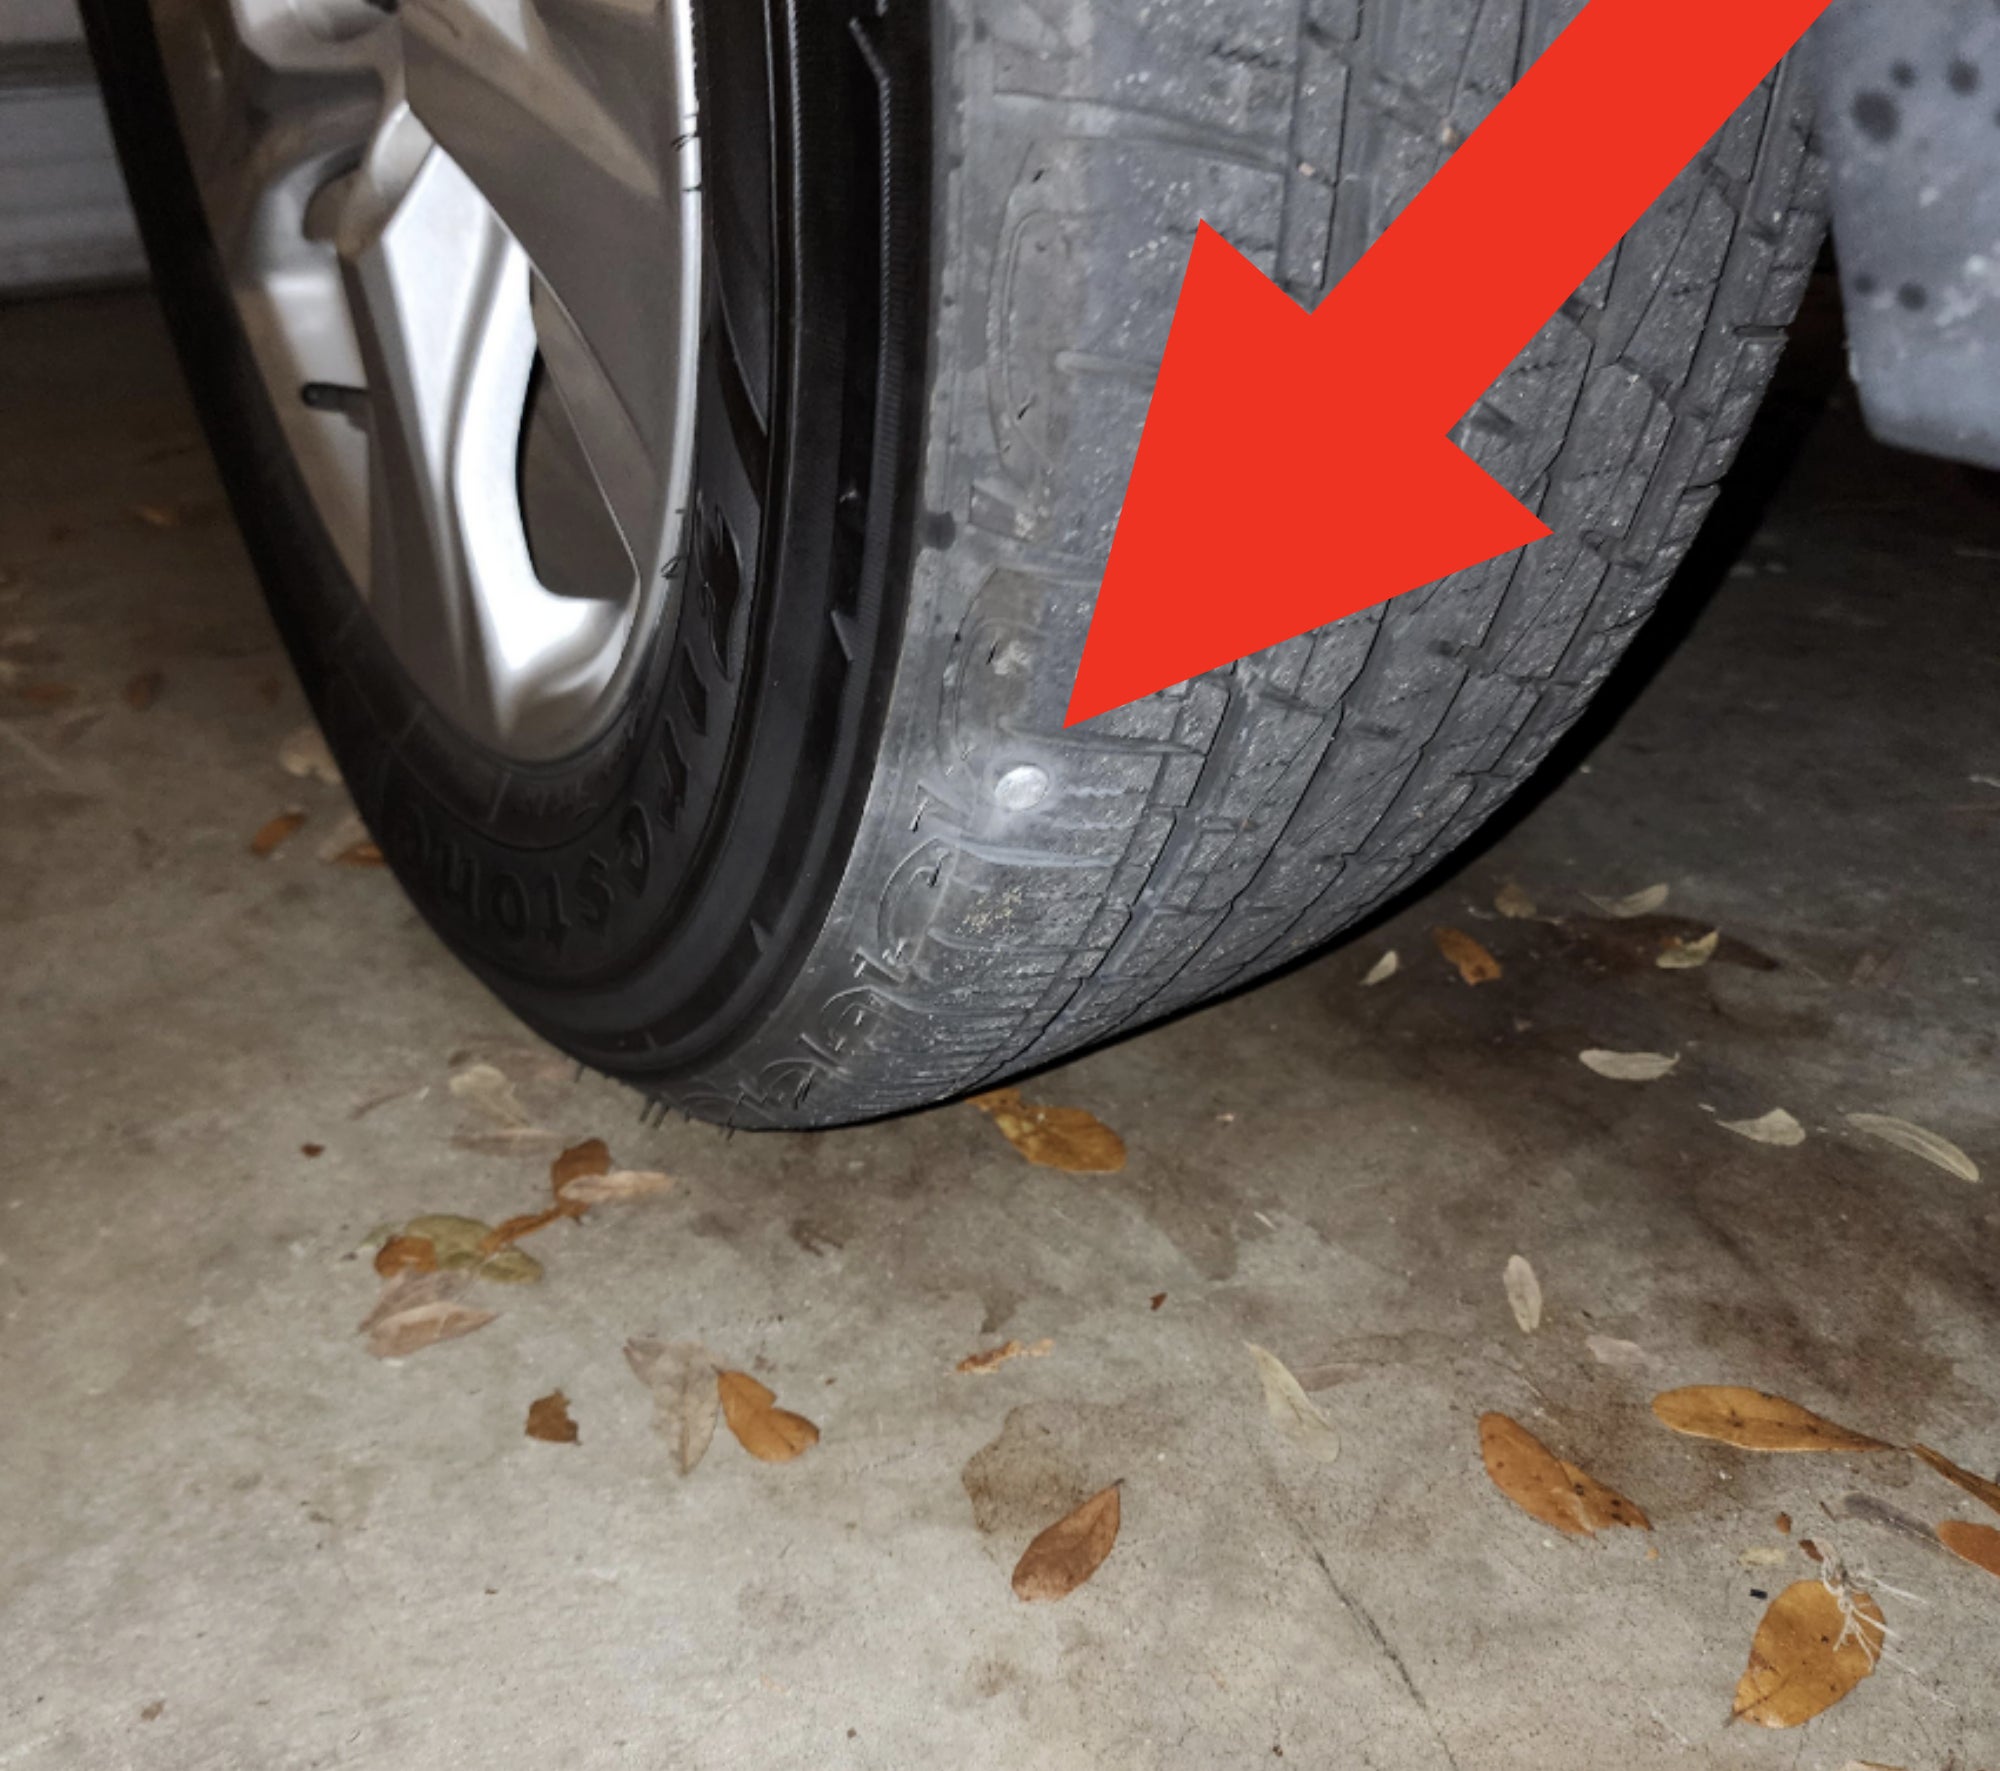 nail in a tire